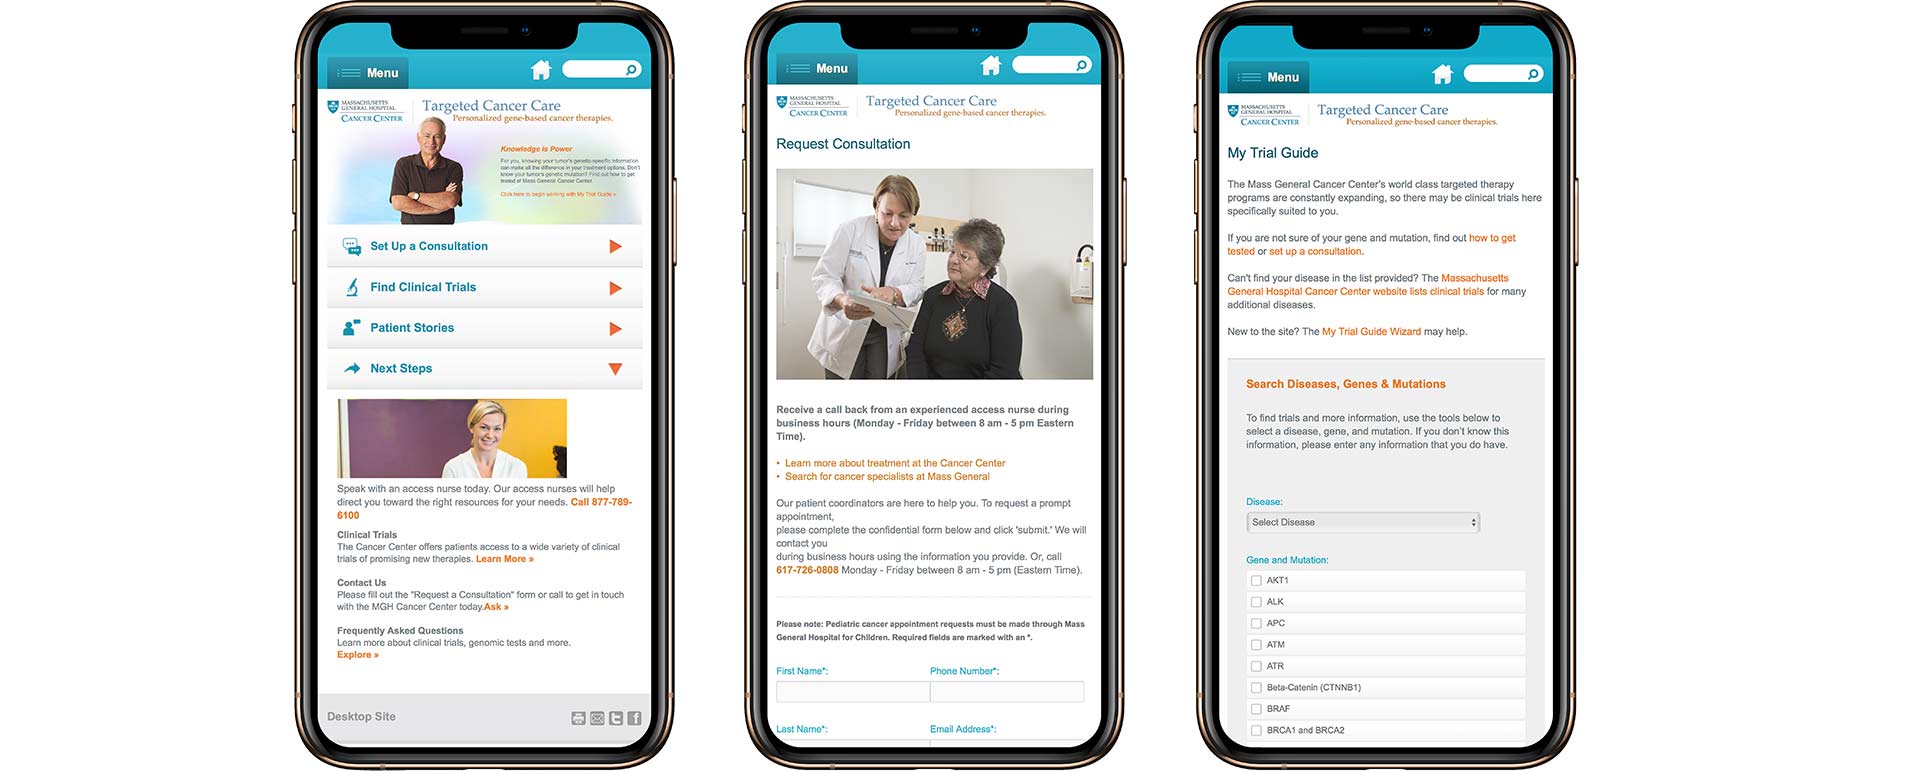 Preview of Targeted Cancer Care site on smartphones